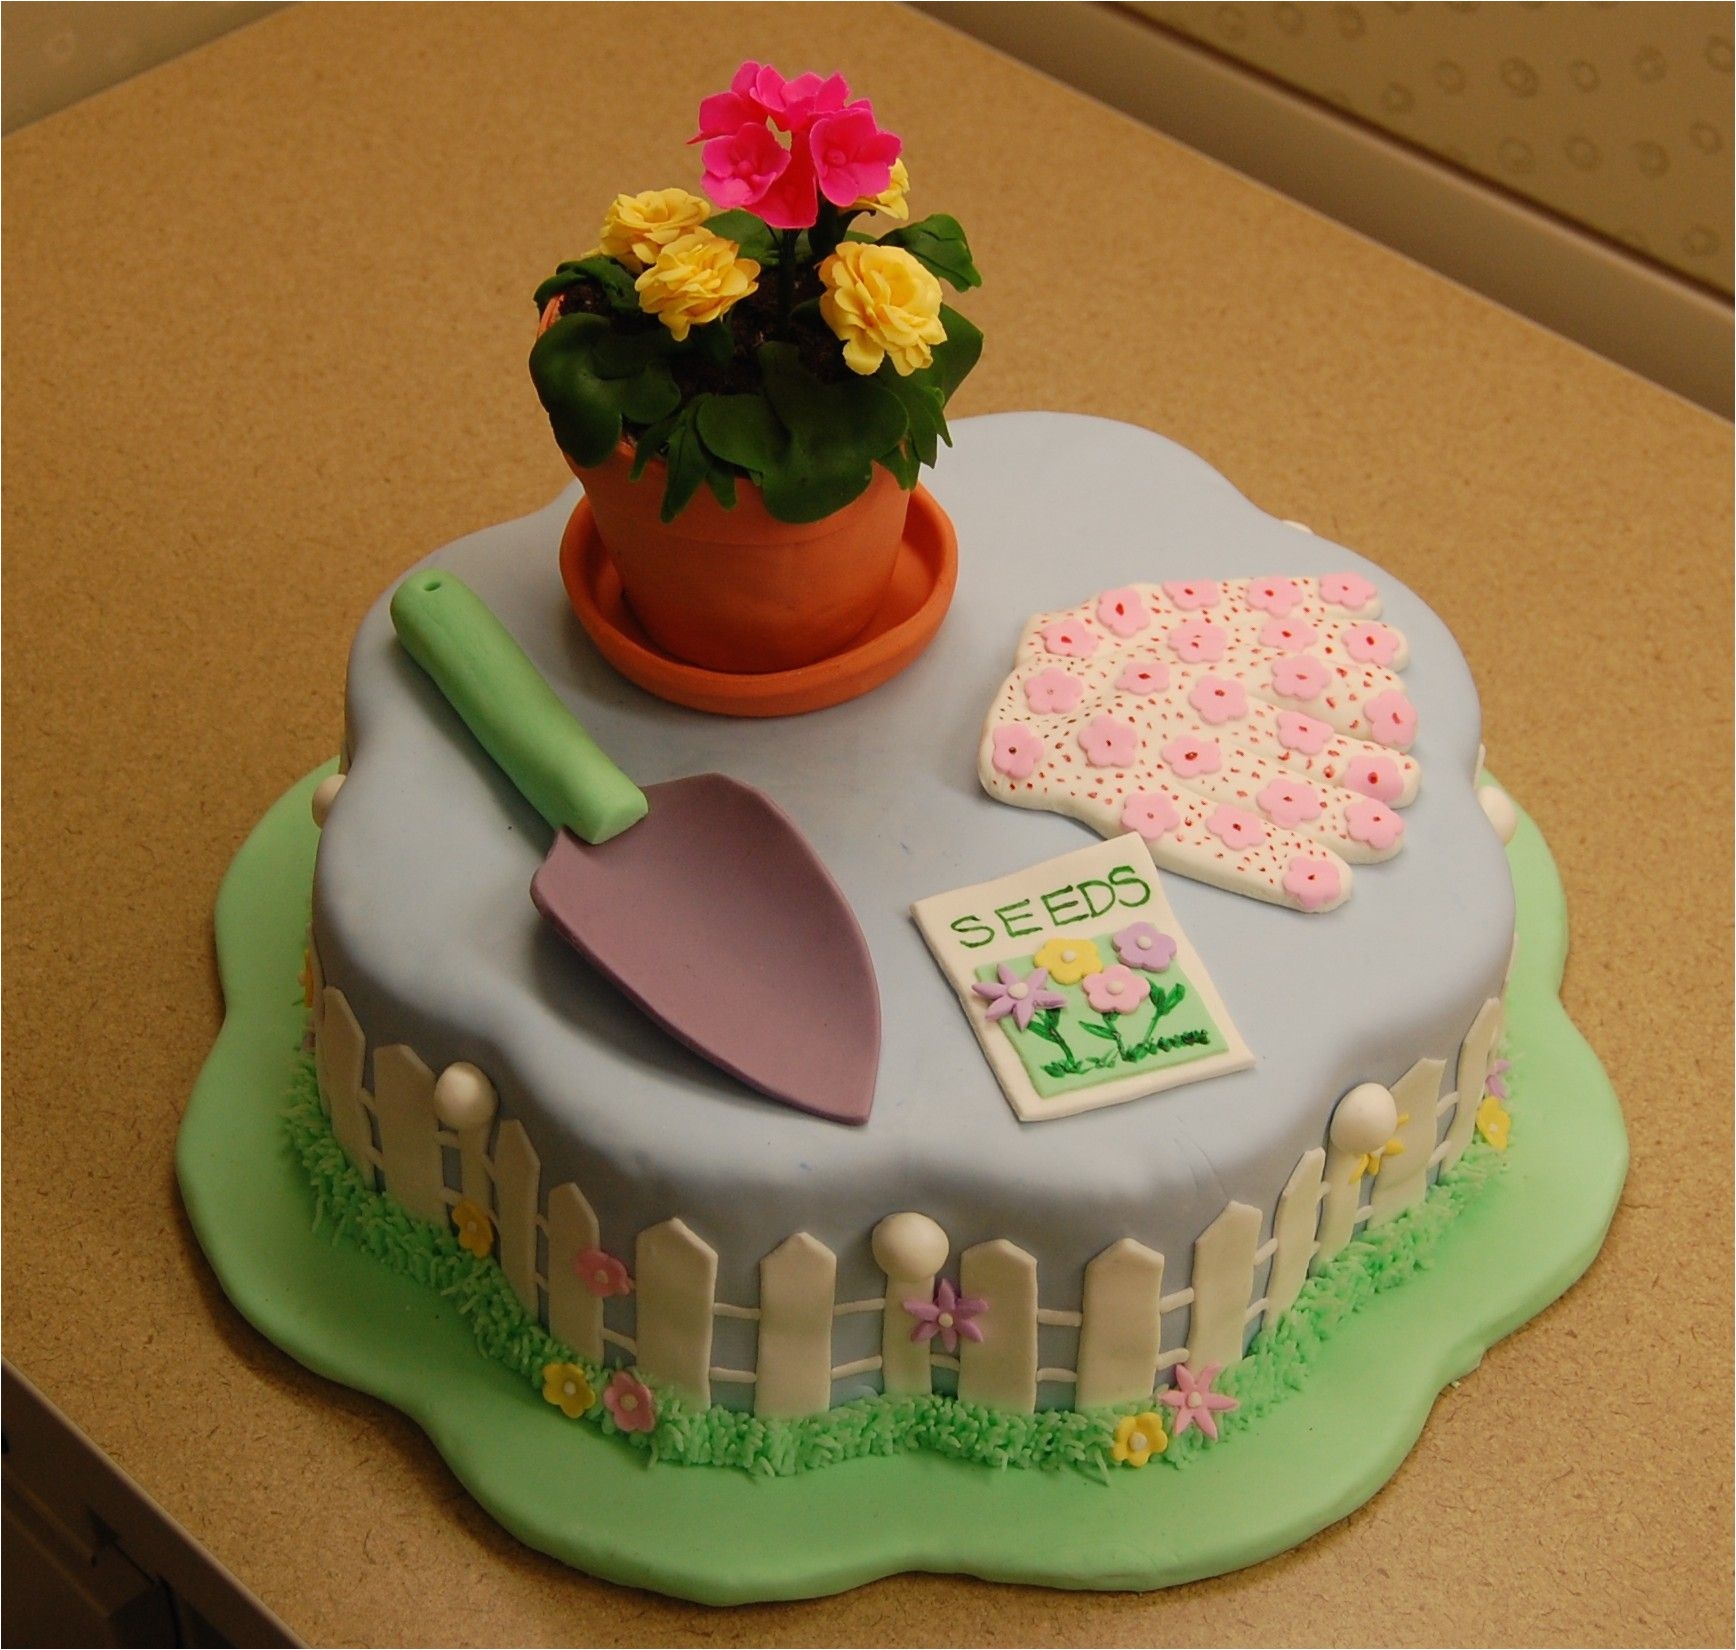 garden retirement cake made this retirement cake for a lady that likes gardening and her favorite flowers are geraniums and marigolds